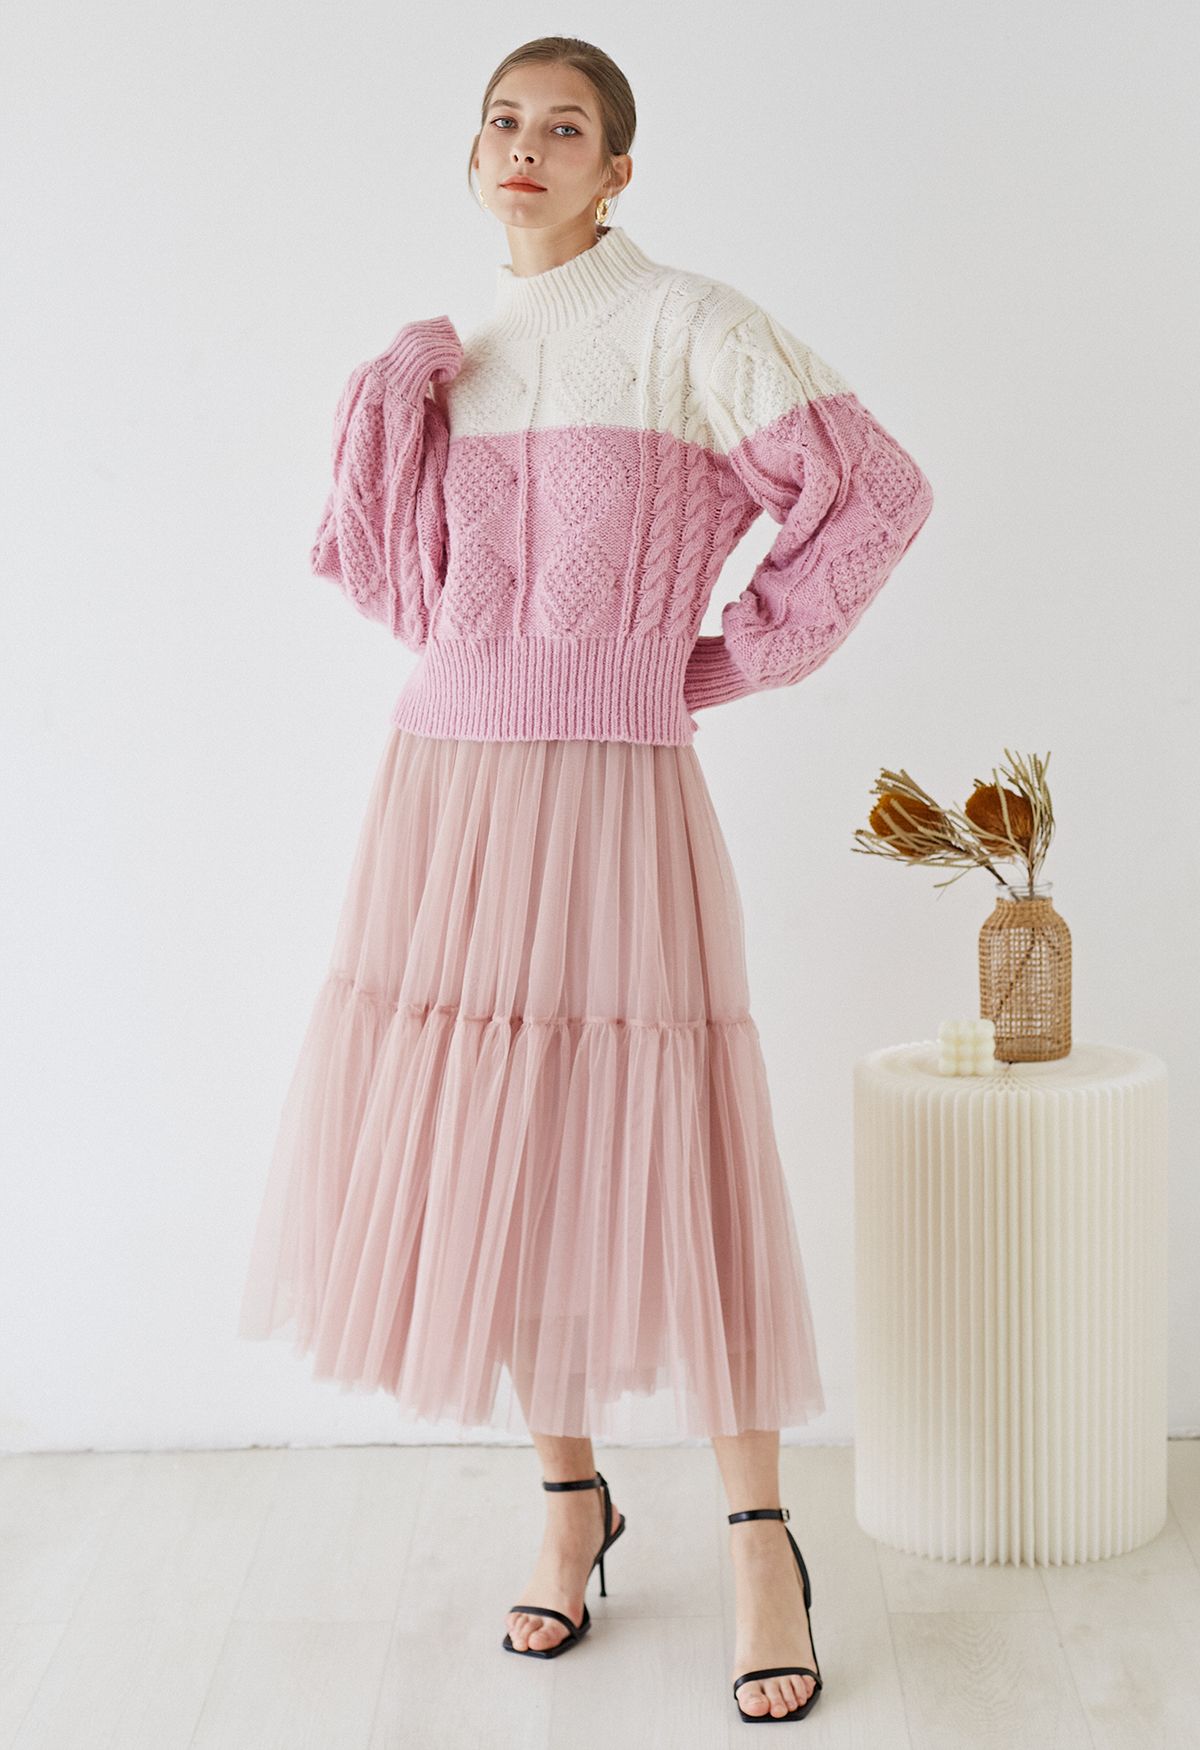 Can't Let Go Mesh Tulle Skirt in Pink